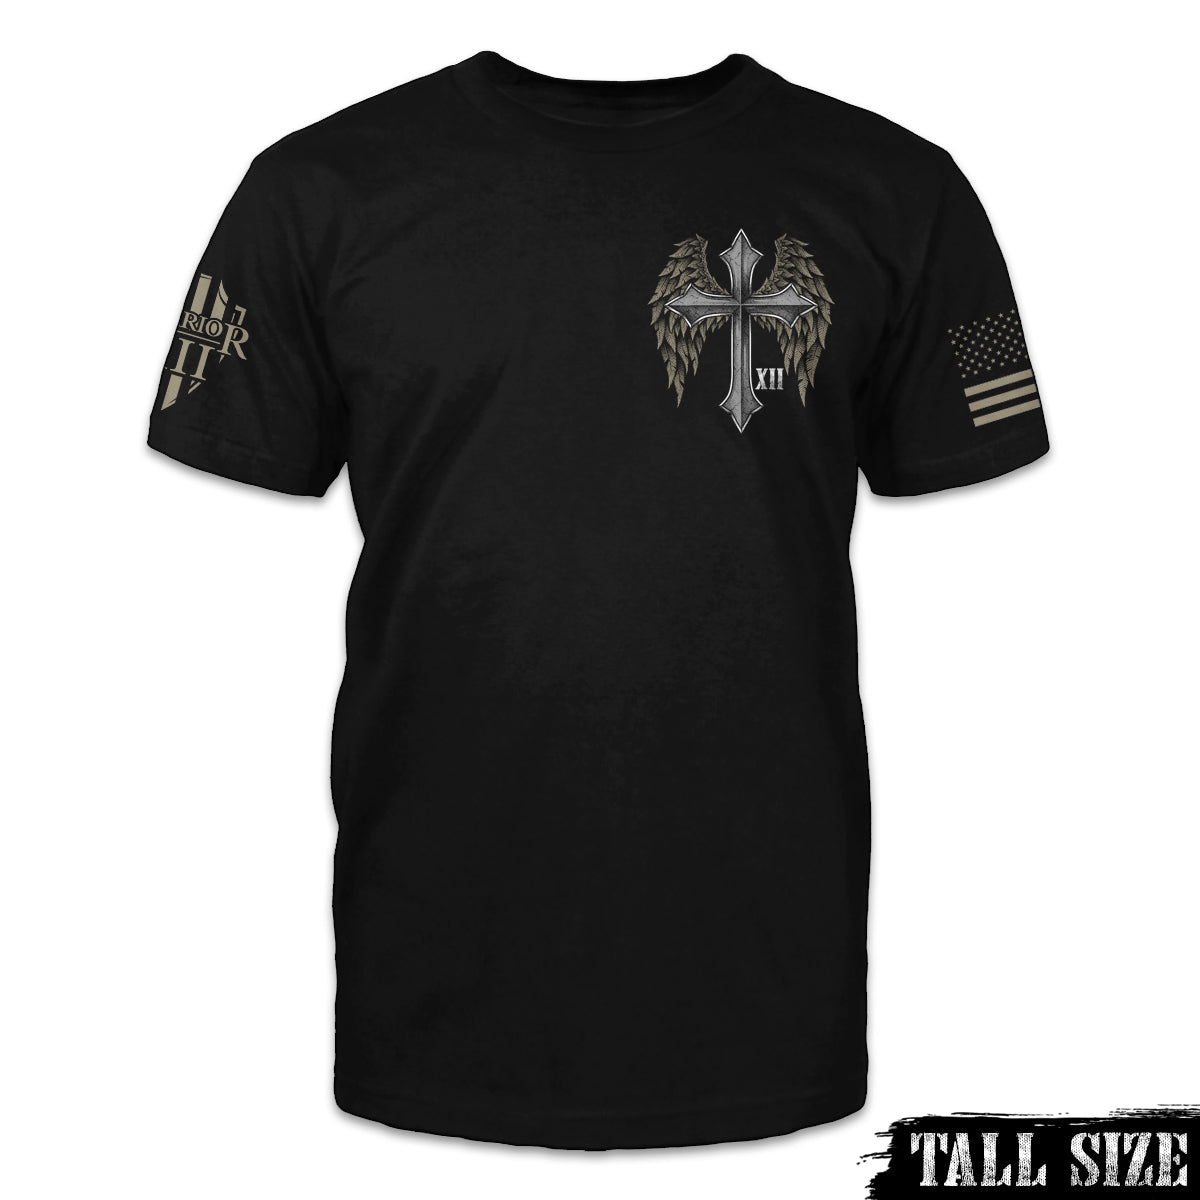 A black tall size shirt with a cross with wings printed on the front.